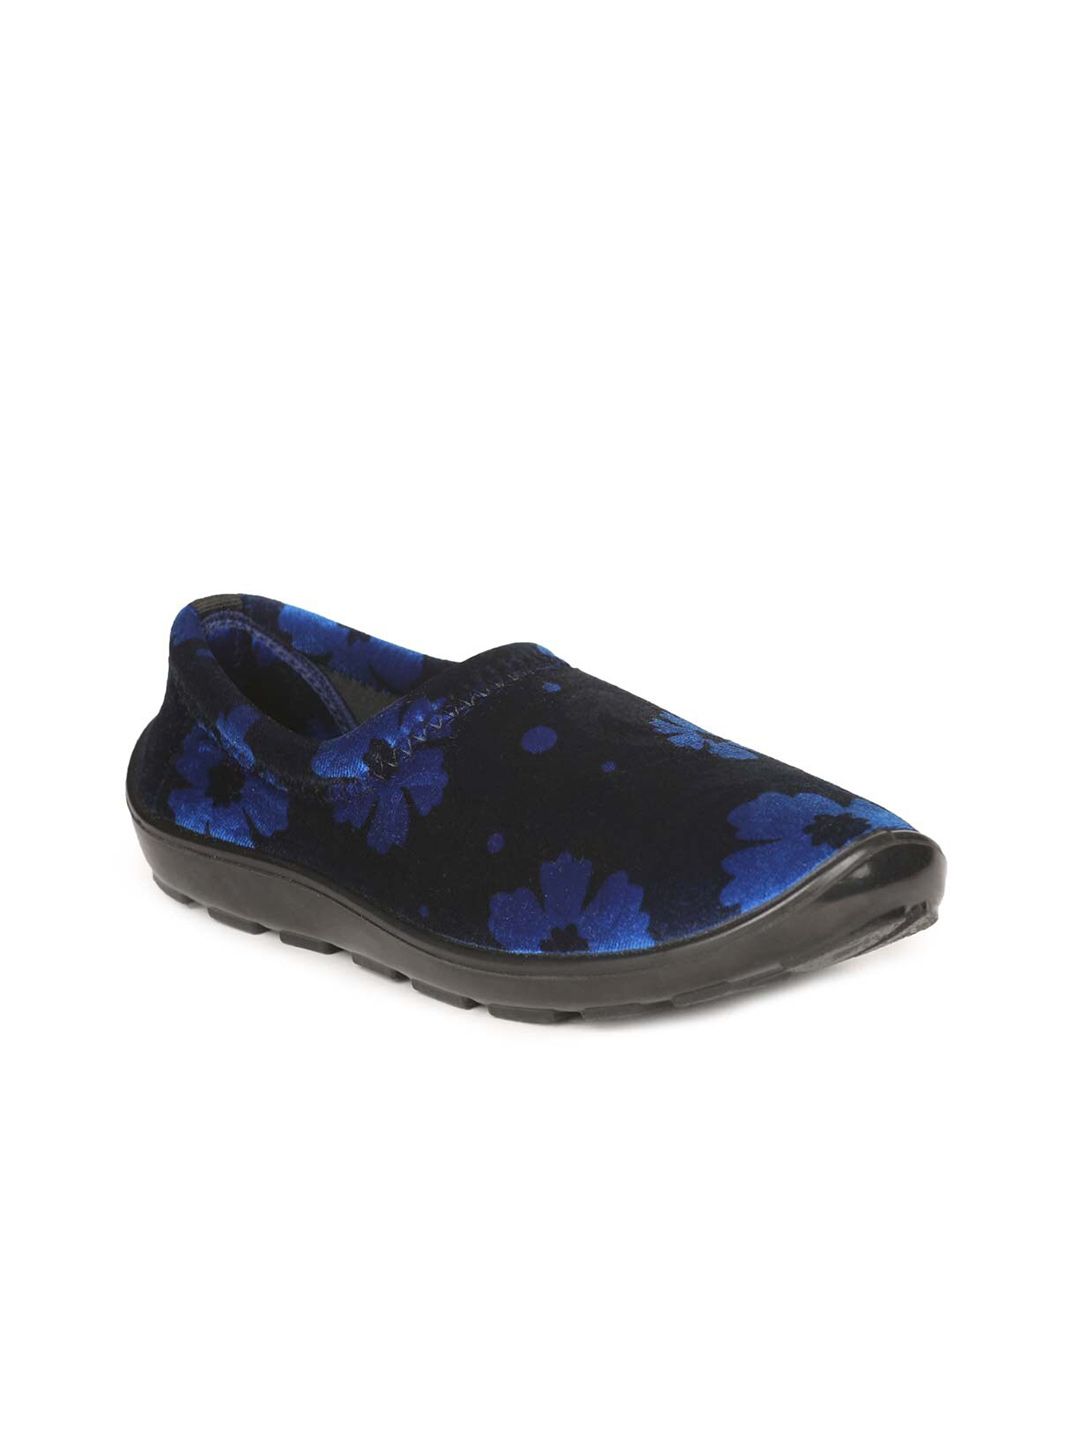 Paragon Women Blue Printed Slip-On Sneakers Price in India